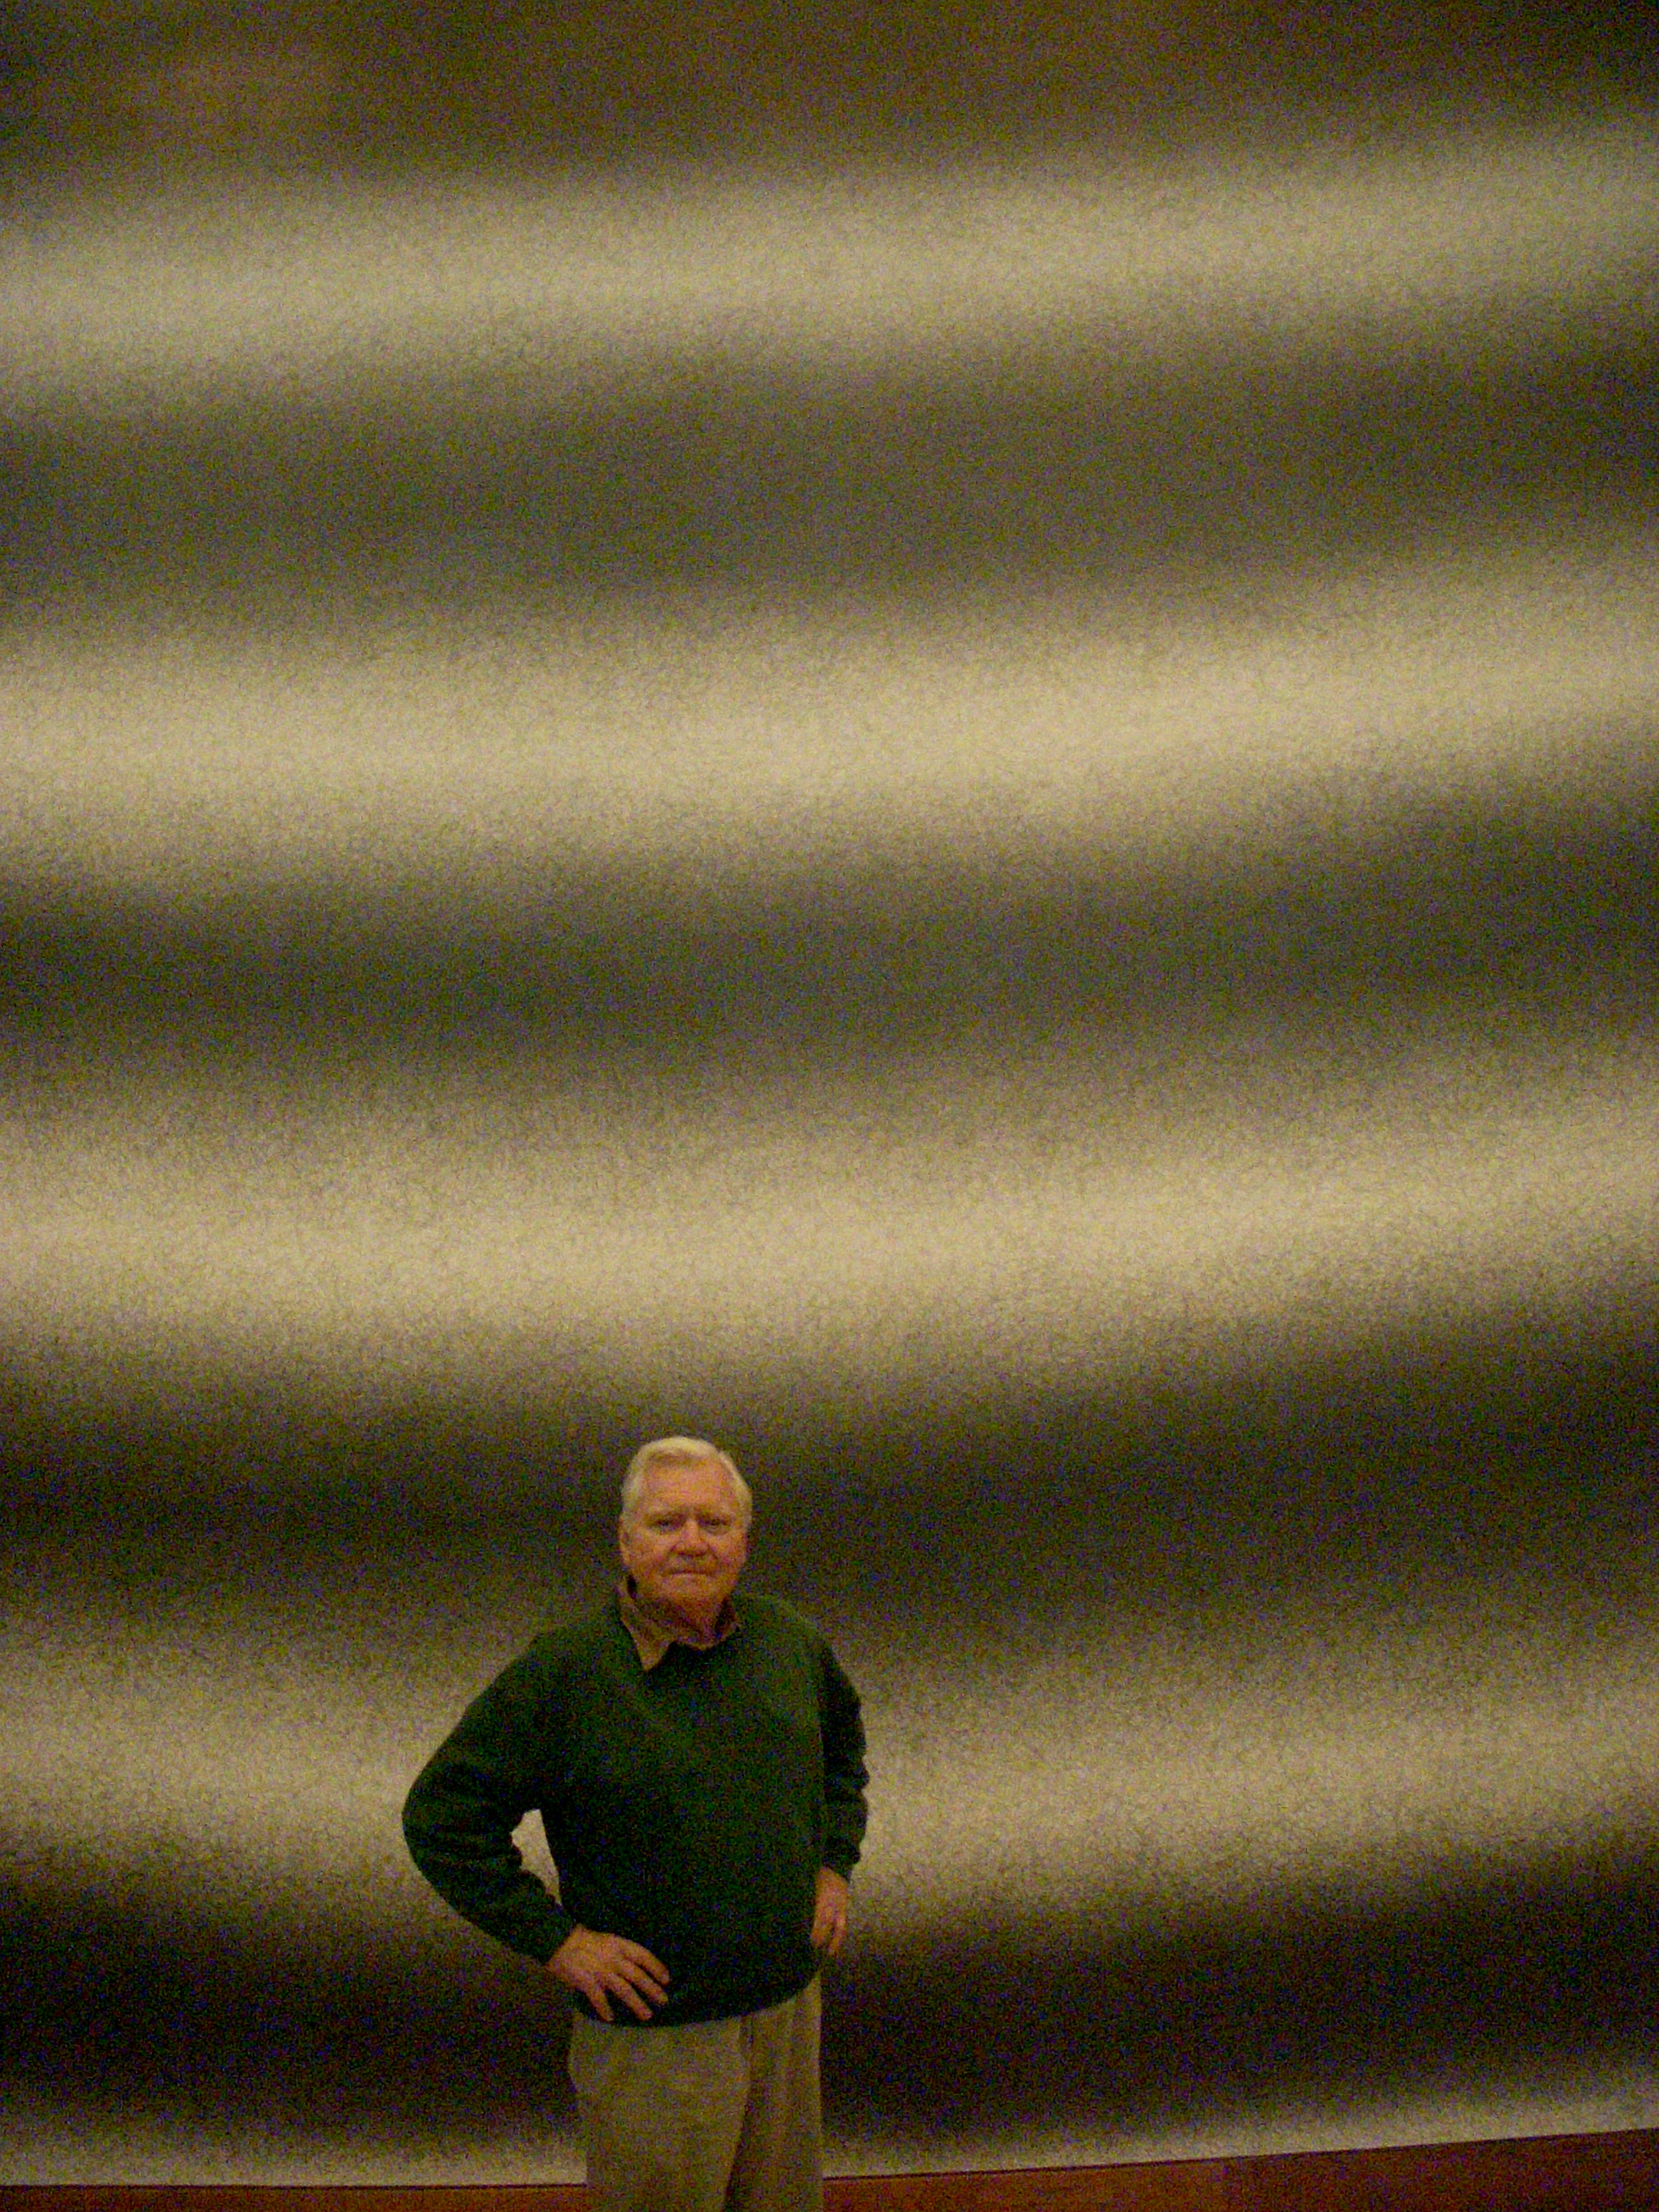   JU in front of the Sol Lewitt wall drawing, shortly after the death of Lewitt and the completion of his drawing at the Allen Memorial Art Museum, Oberlin, Ohio, May 2007  